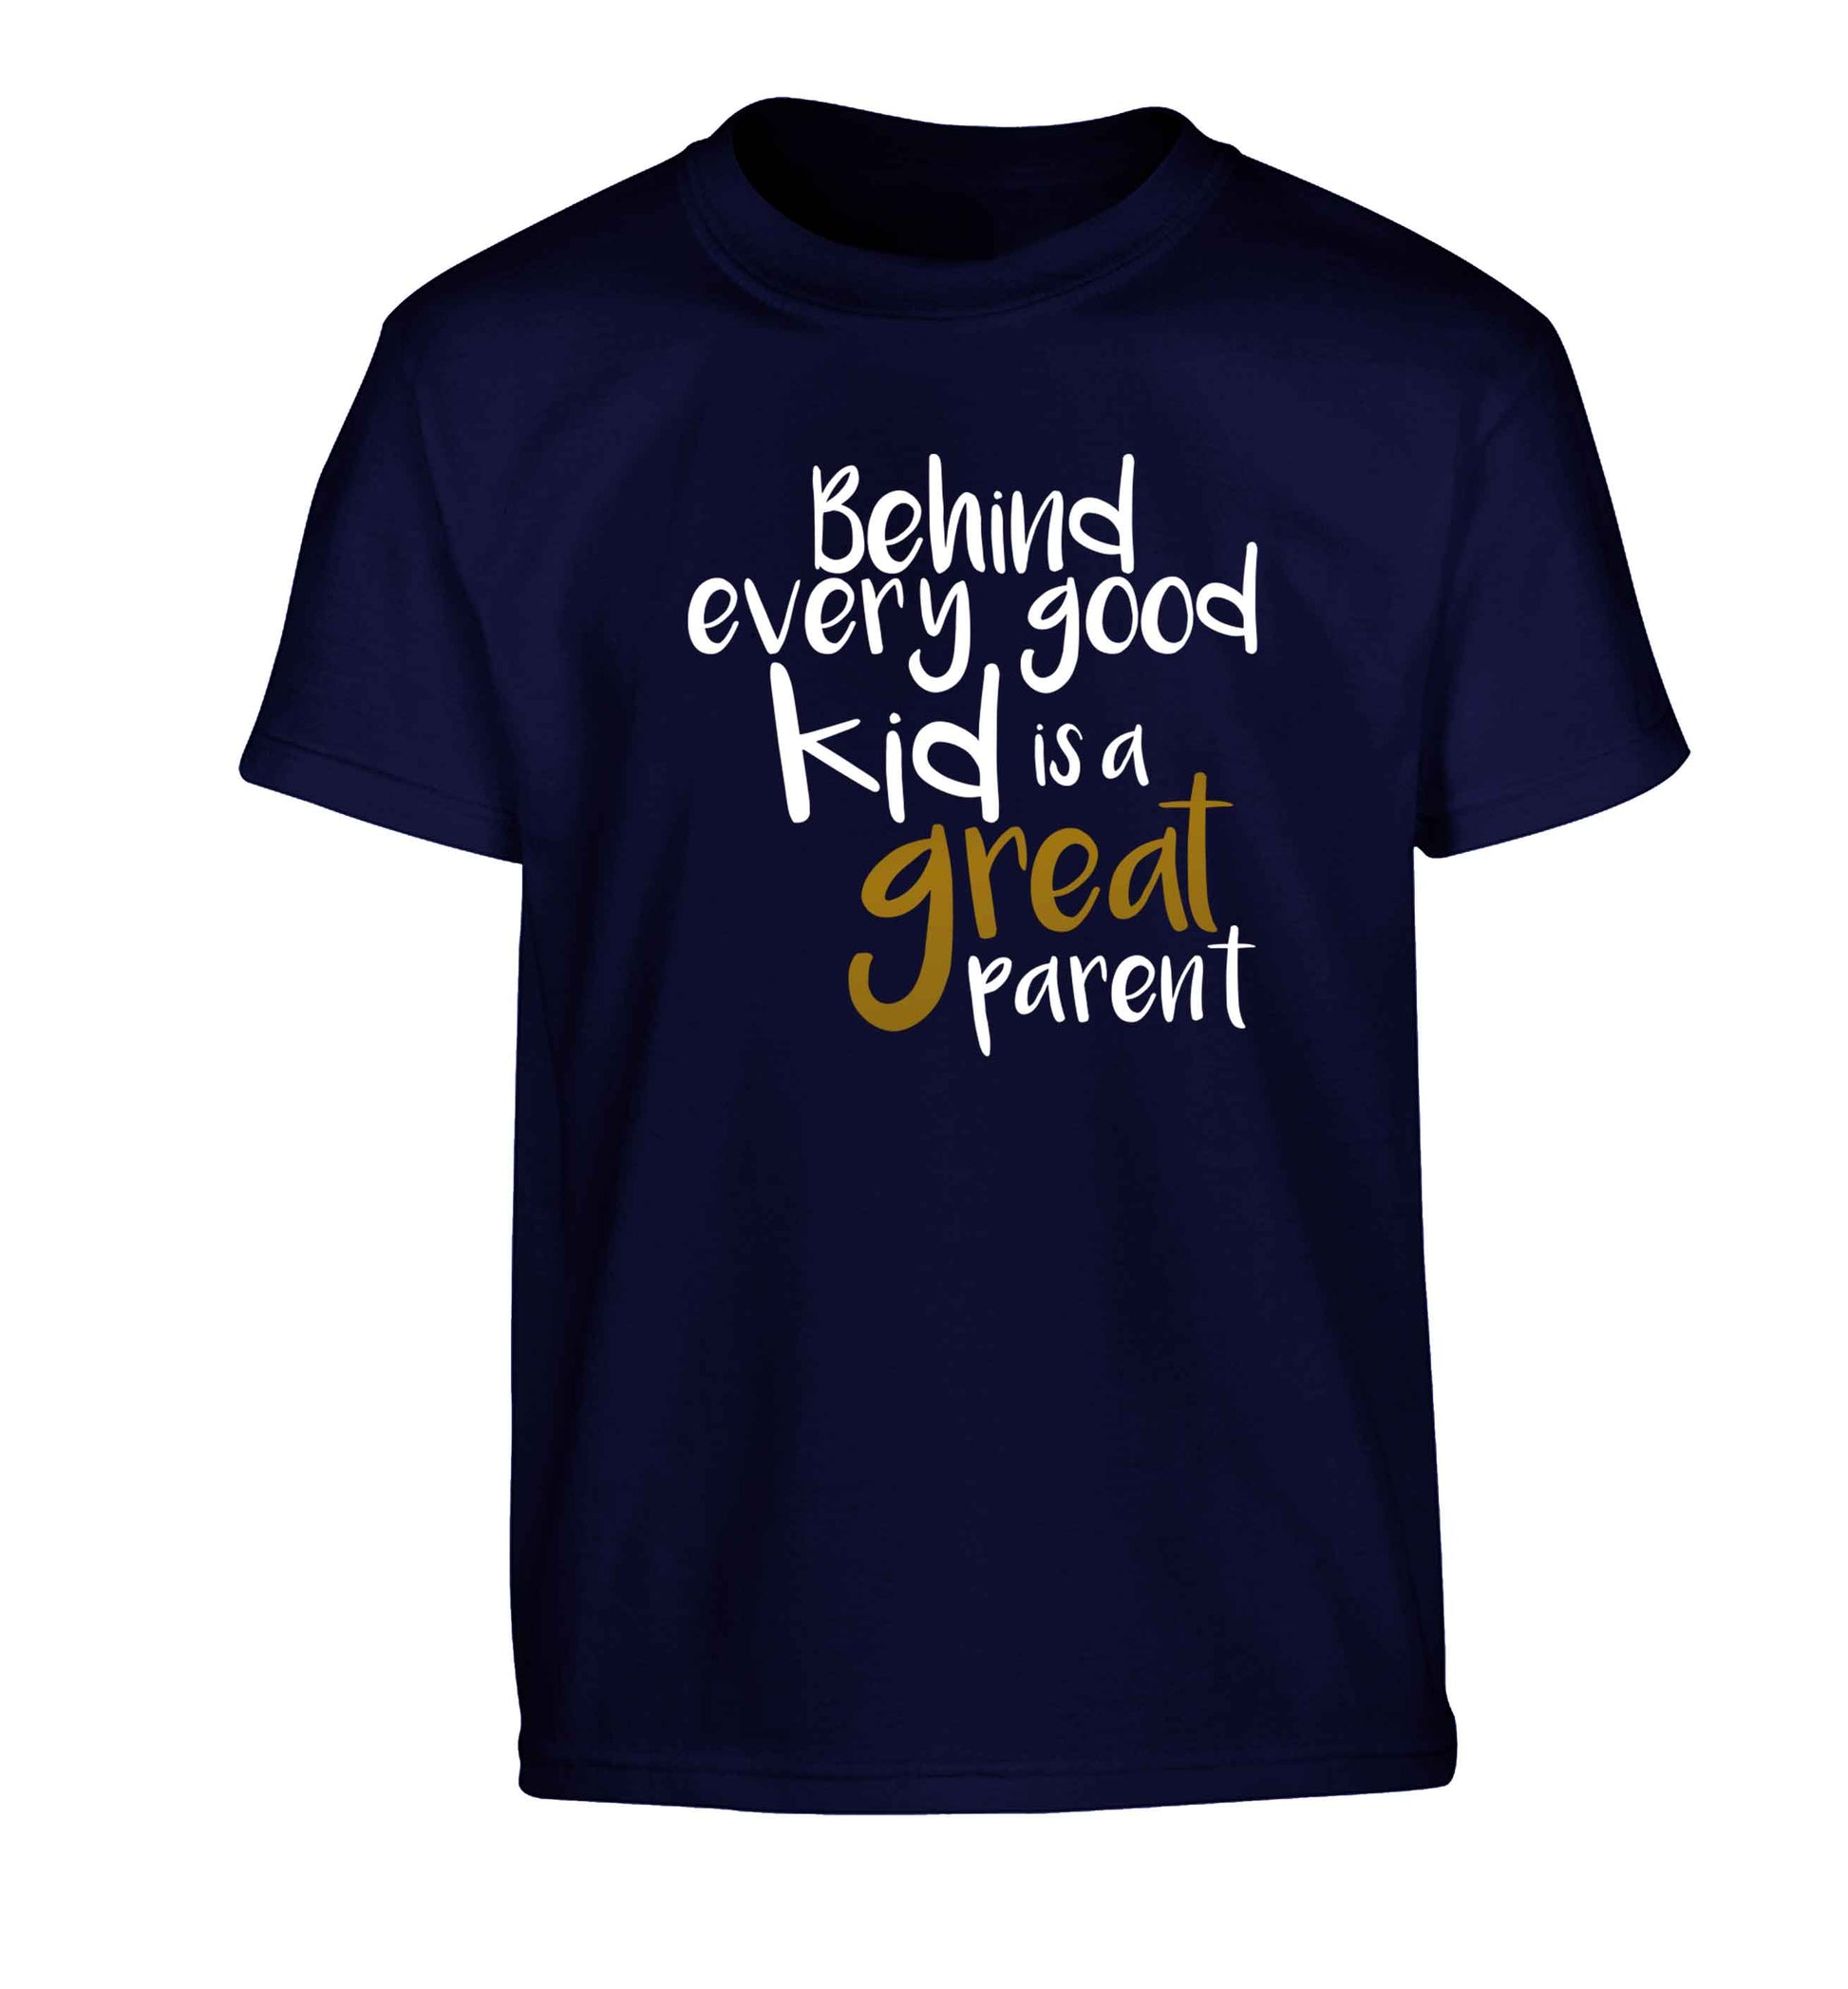 Behind every good kid is a great parent Children's navy Tshirt 12-13 Years